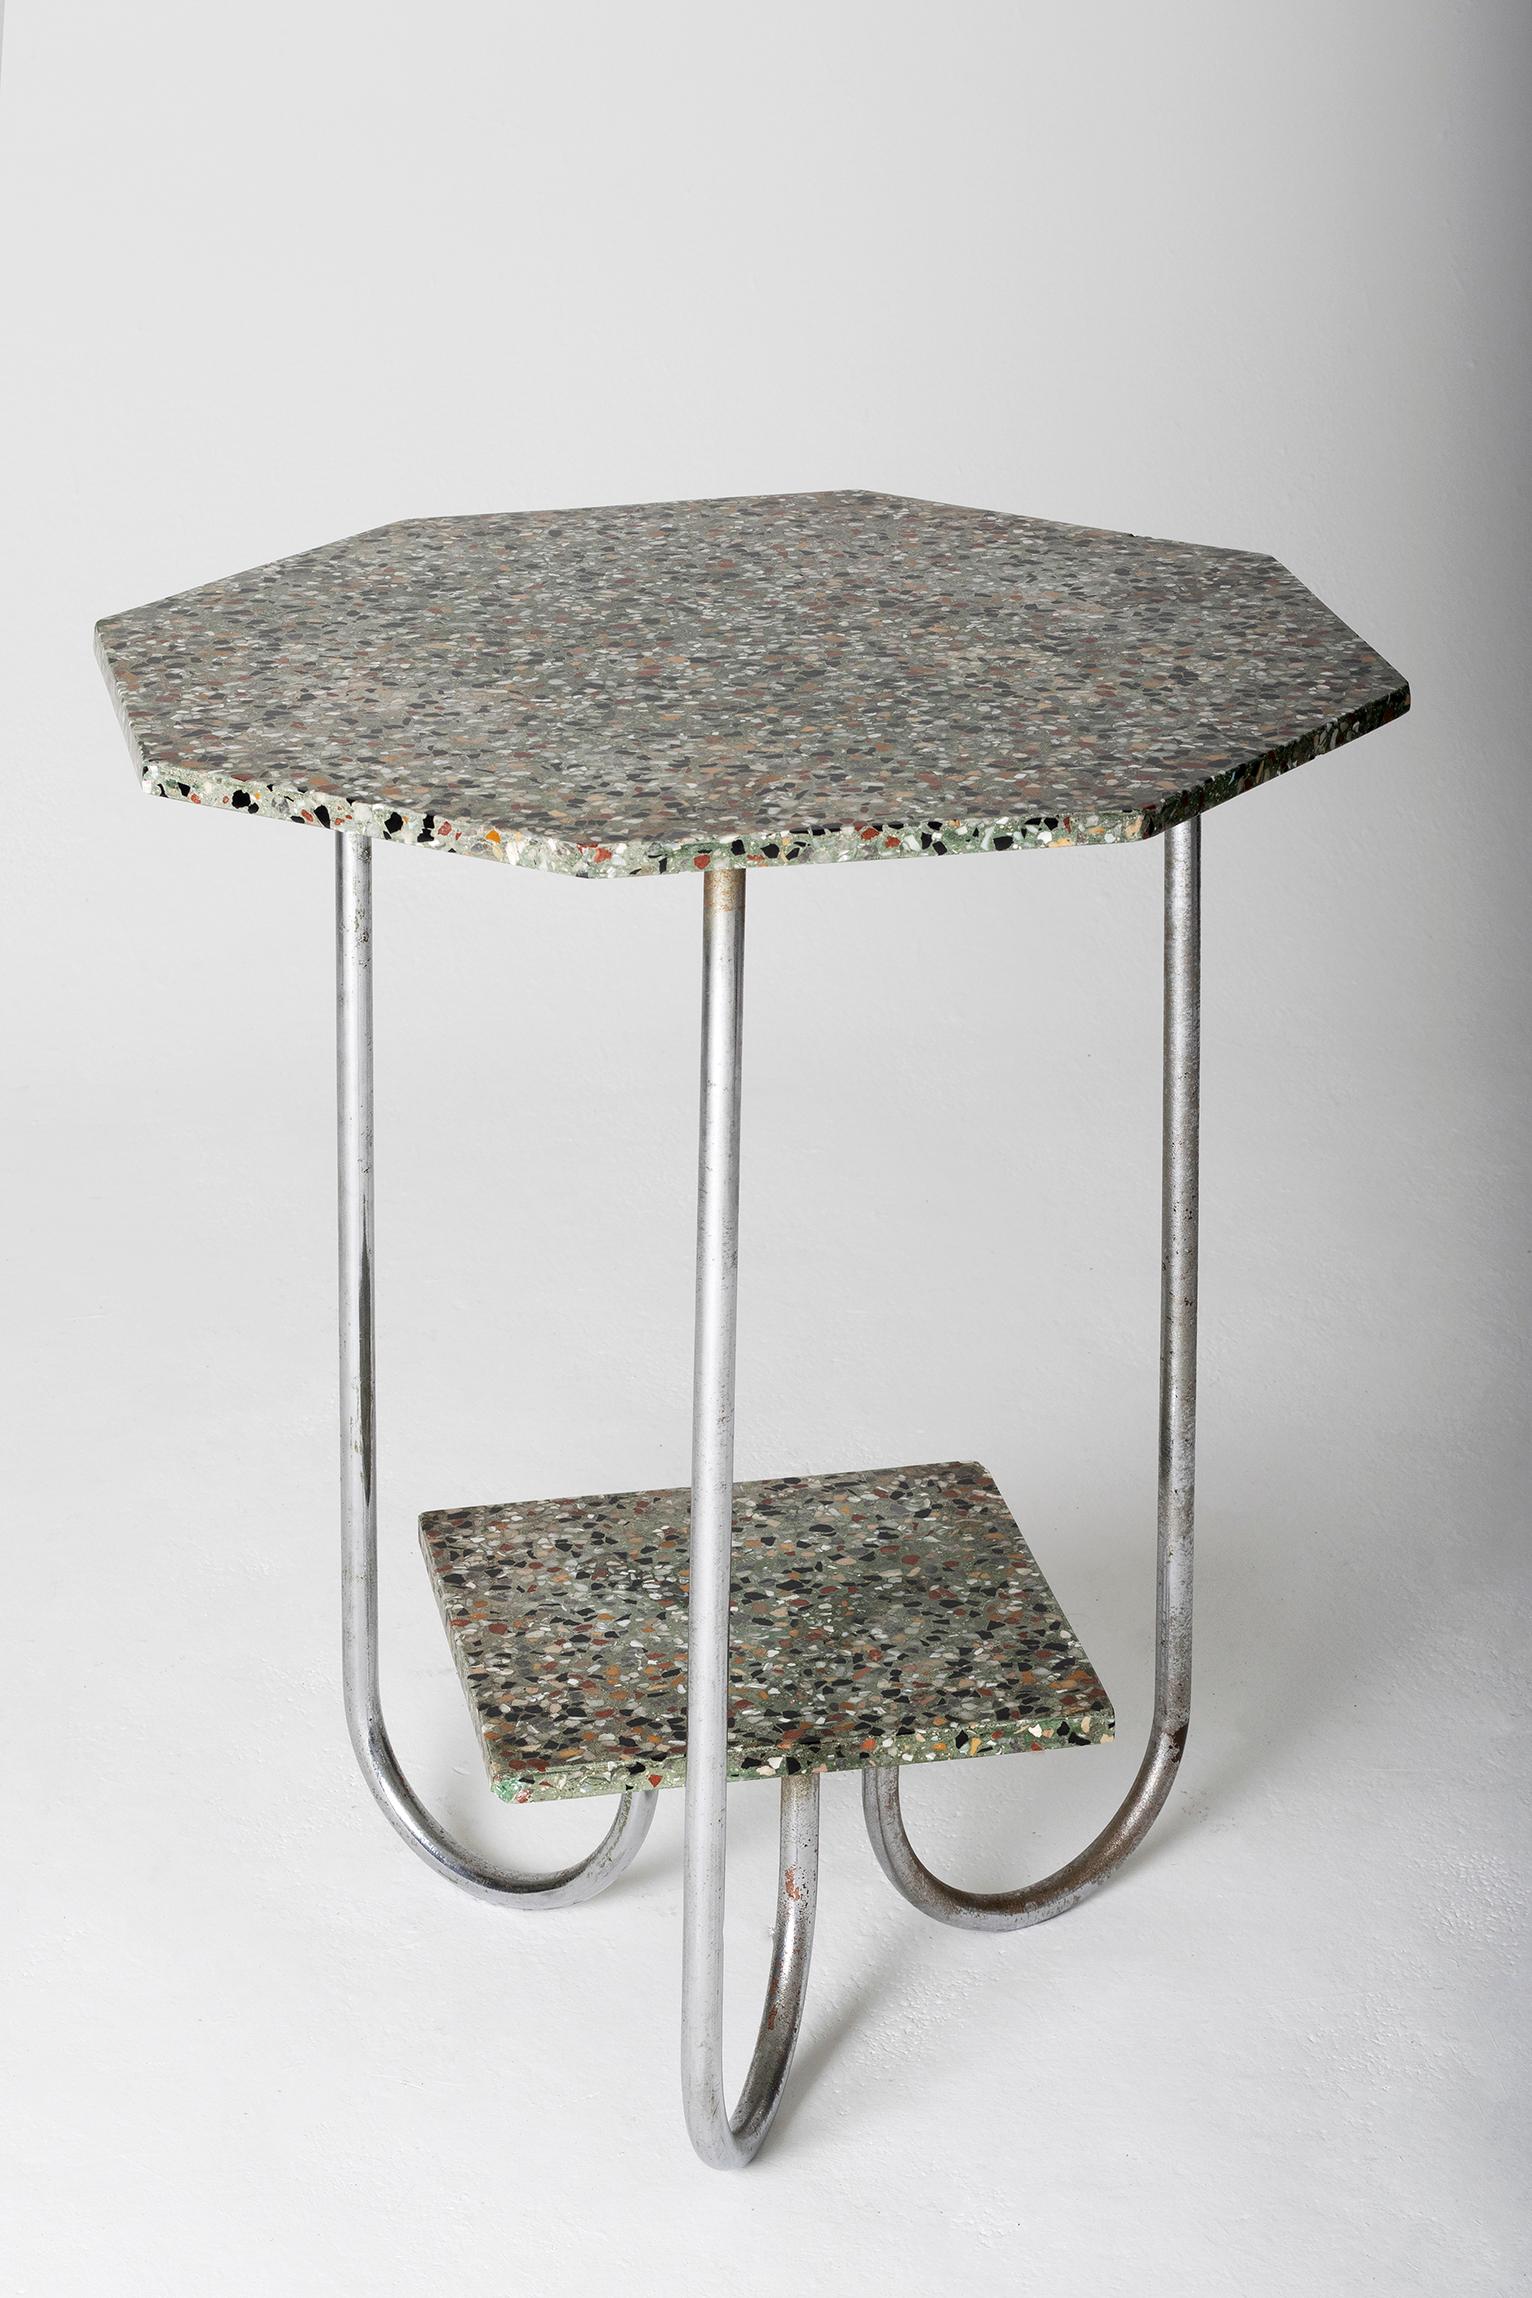 Art Deco Modernist Terrazzo and Chrome Octagonal Table